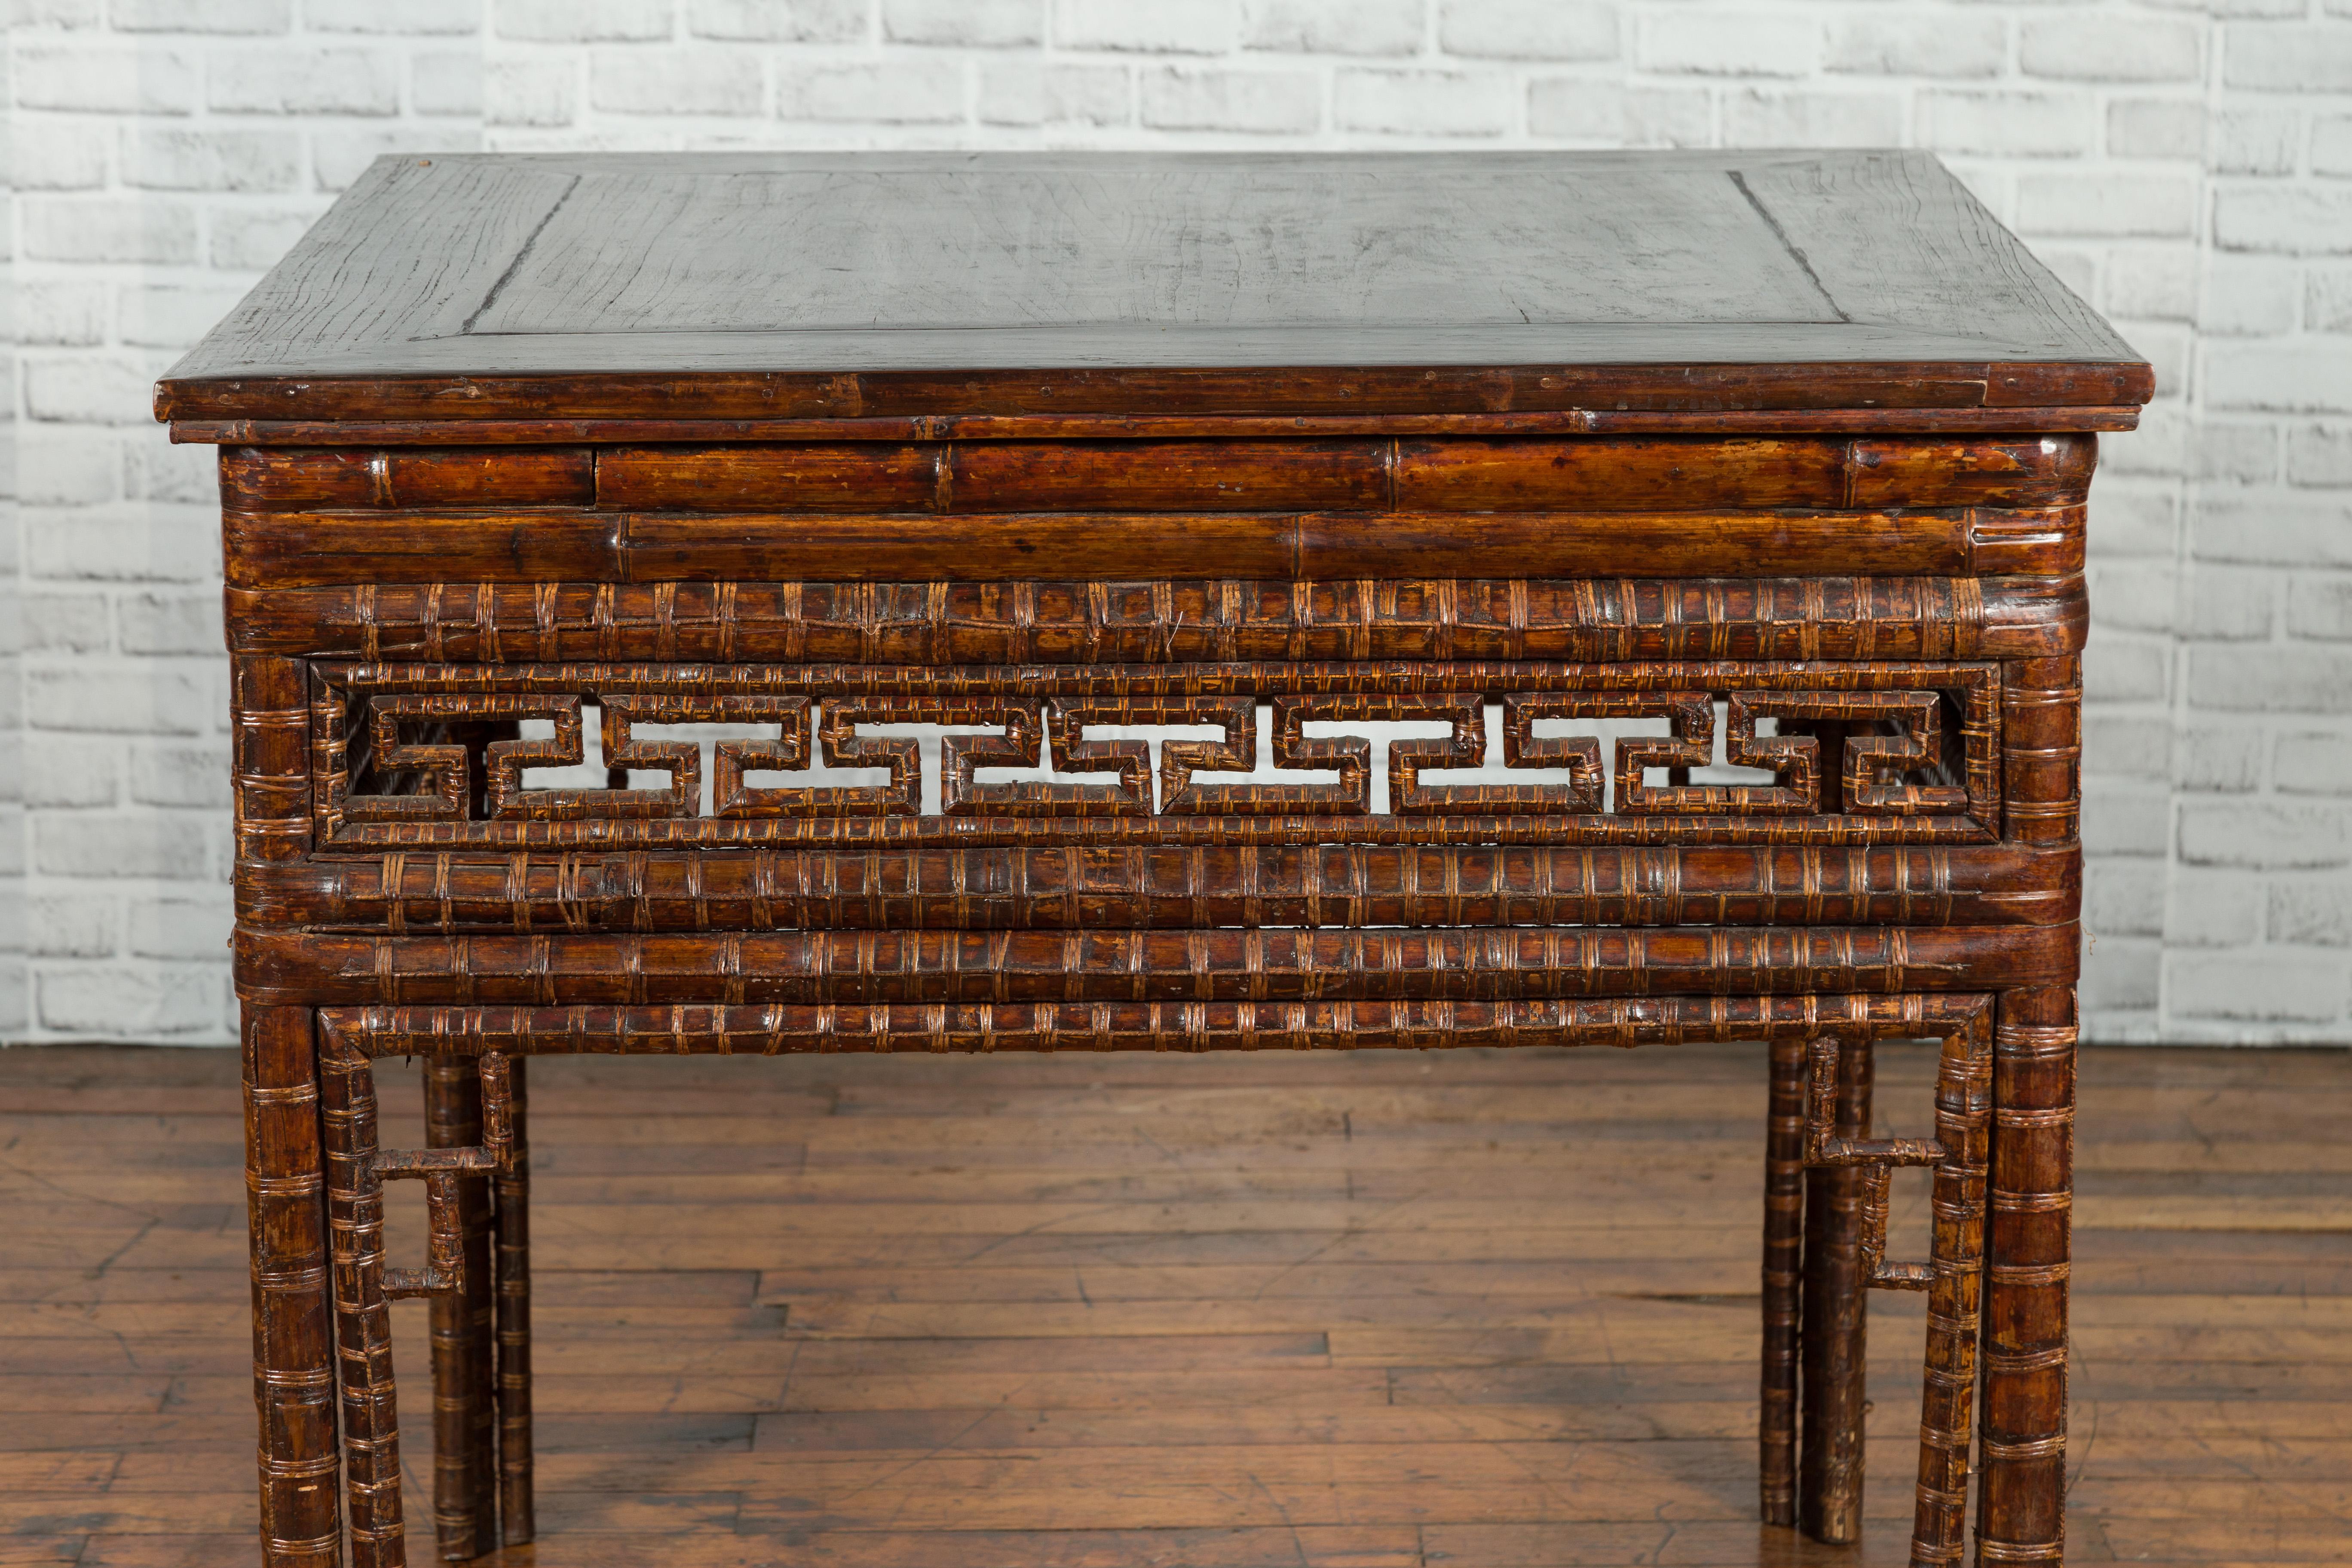 Chinese Qing Dynasty Period 19th Century Bamboo Hall Table with Fretwork Motifs For Sale 3